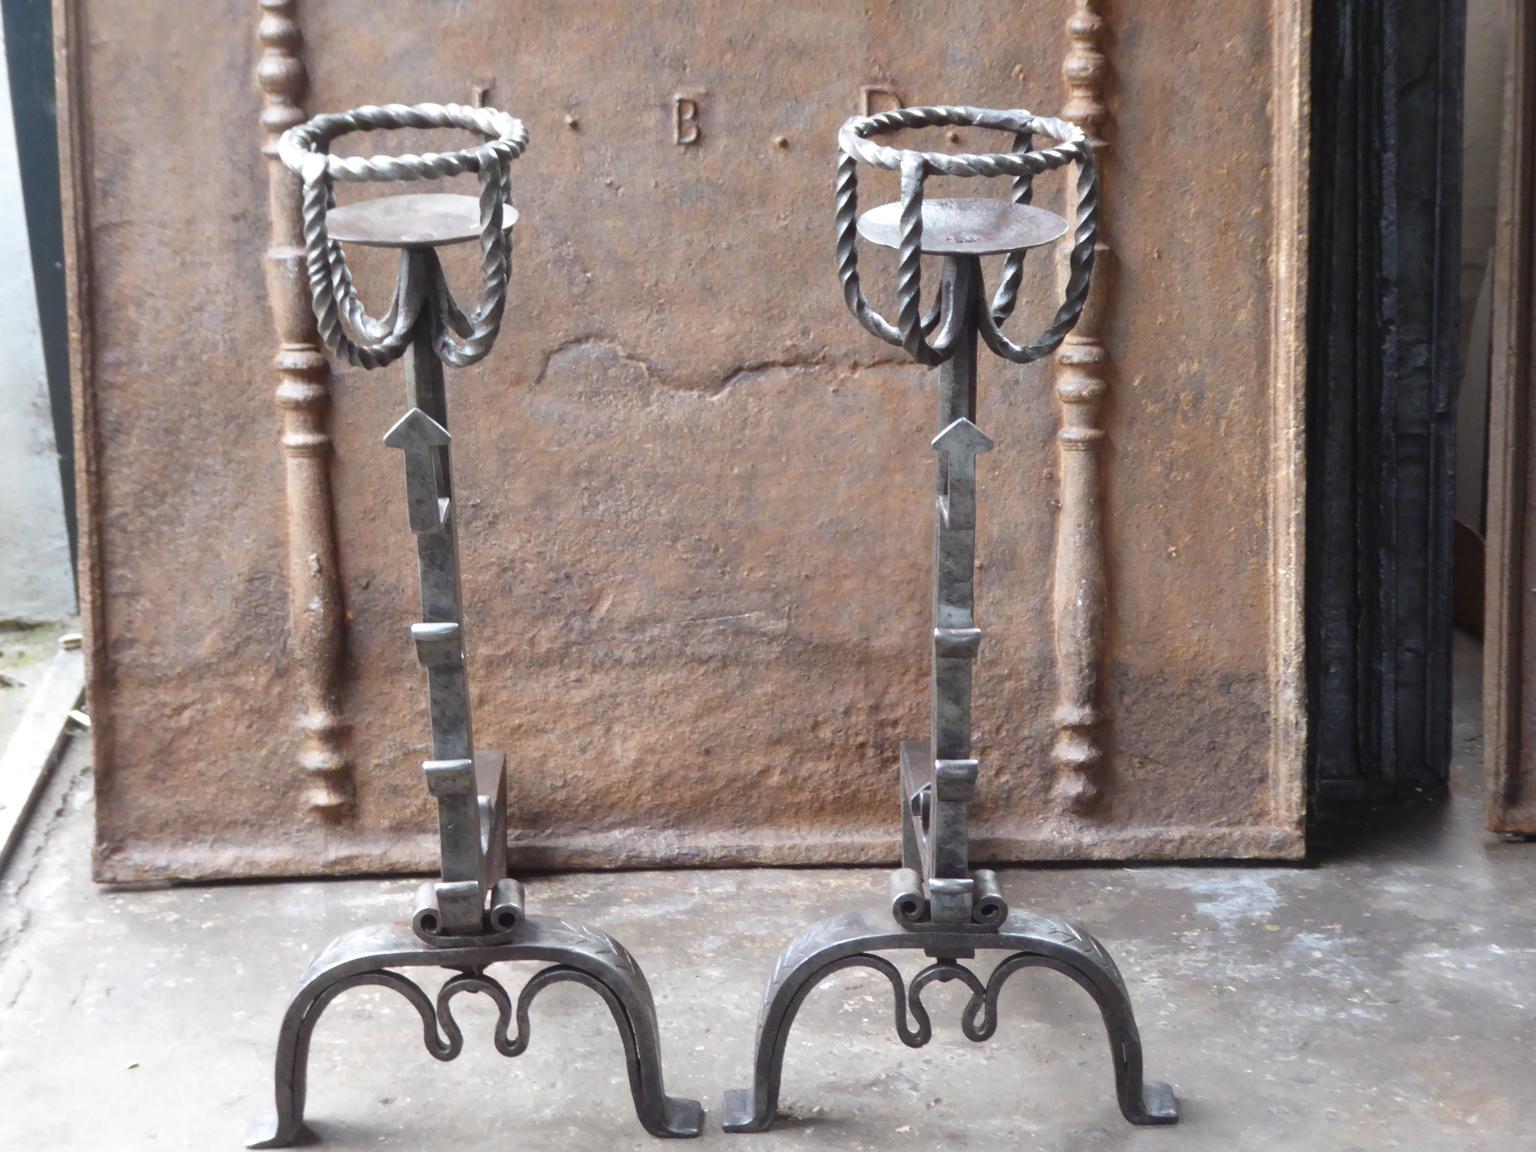 Large 18th century French andirons made of wrought iron. The style of the andirons is Gothic. These French andirons are called 'landiers' in France. This dates from the times the andirons were the main cooking equipment in the house. They had spit